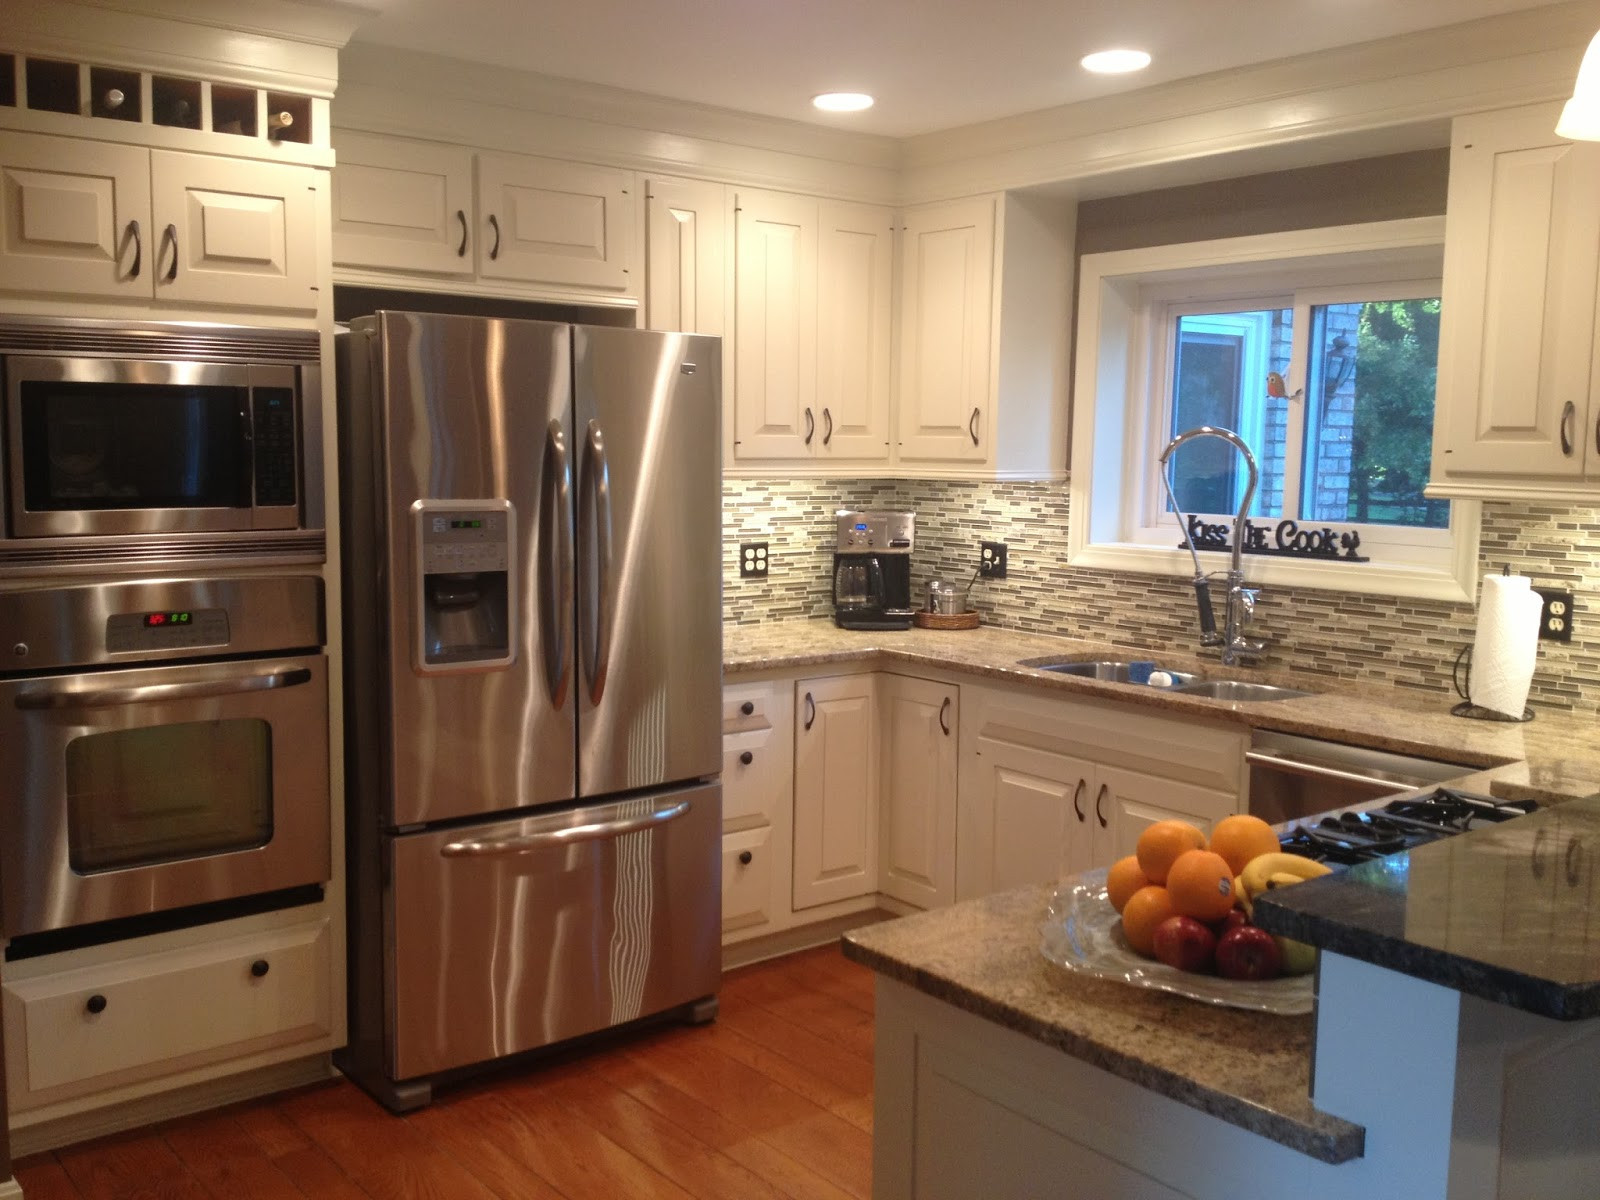 Kitchen Remodel Budgets
 Four Seasons Style The NEW kitchen remodel on a bud